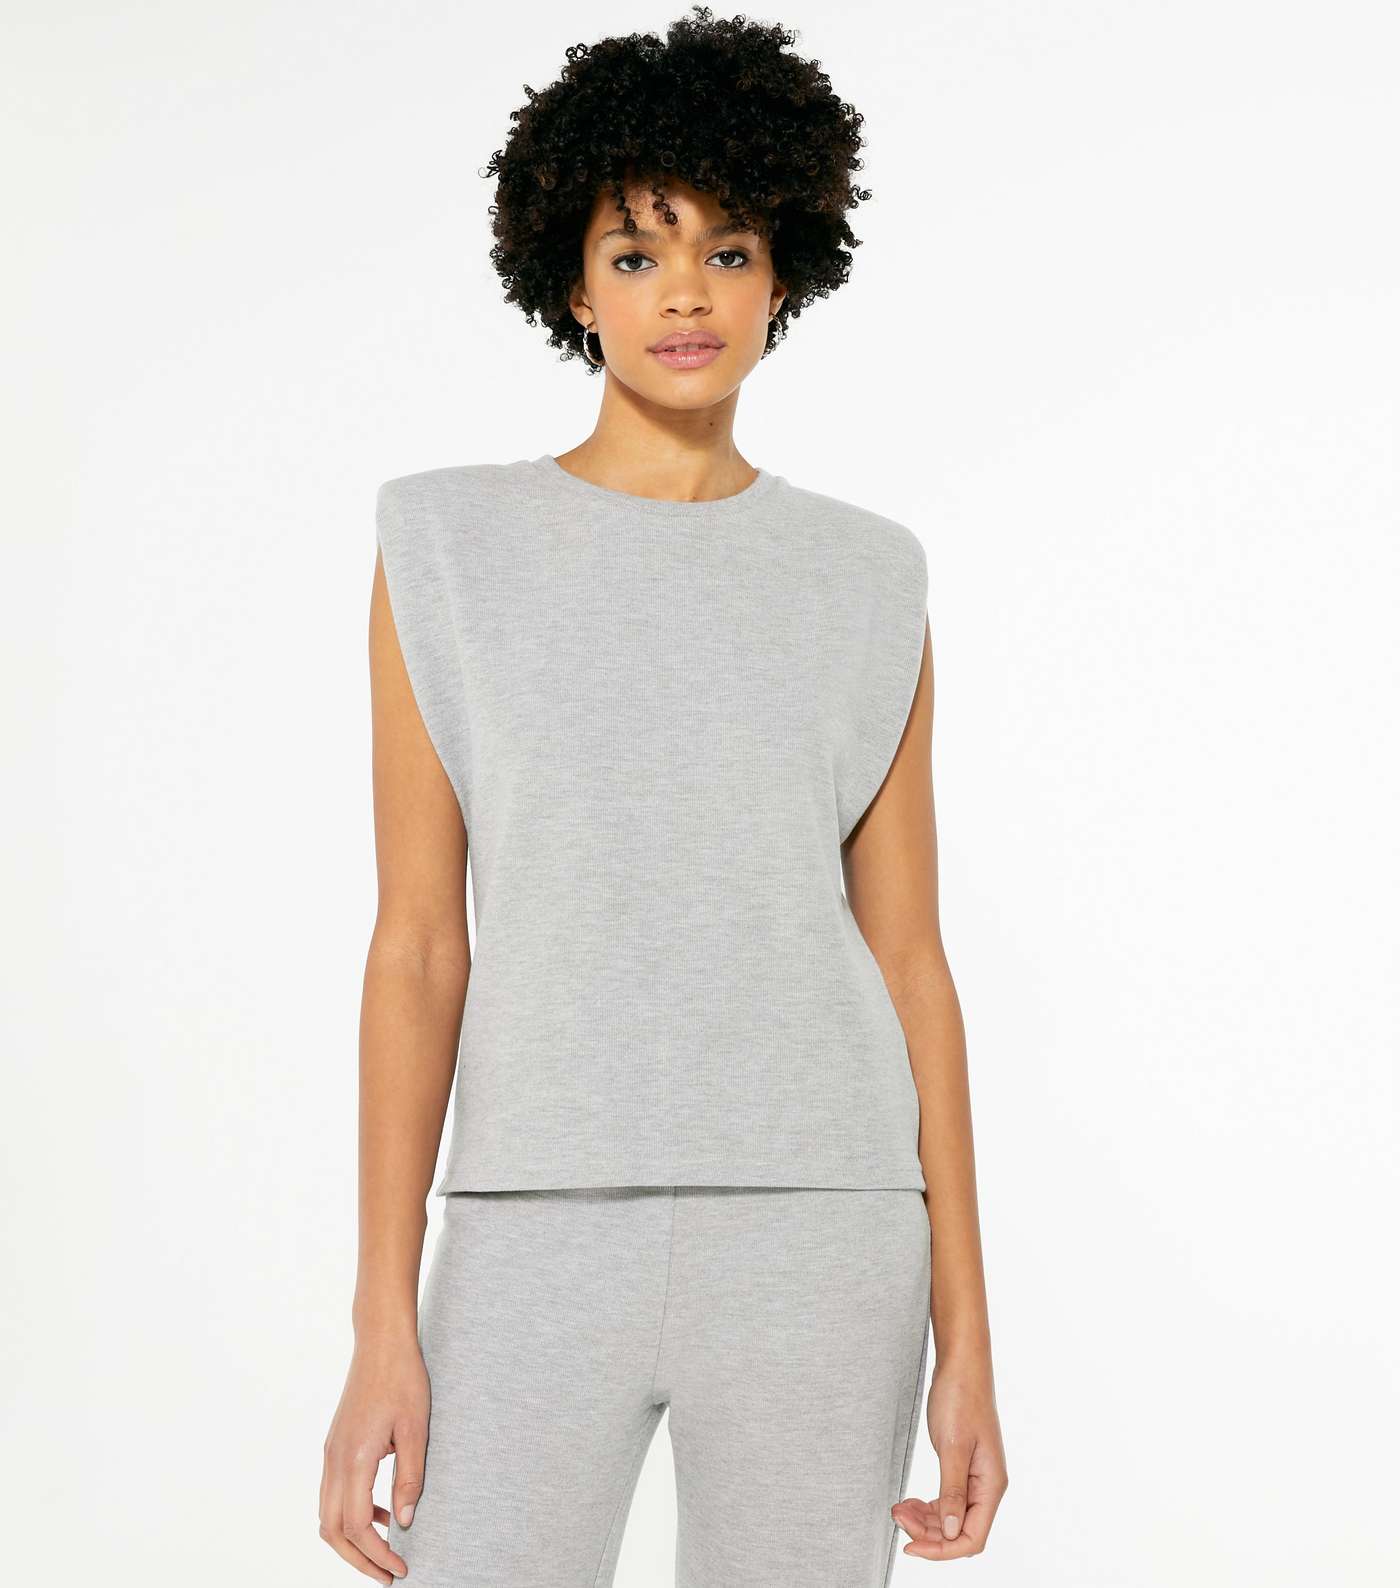 Urban Bliss Grey Soft Touch Sleeveless Top 